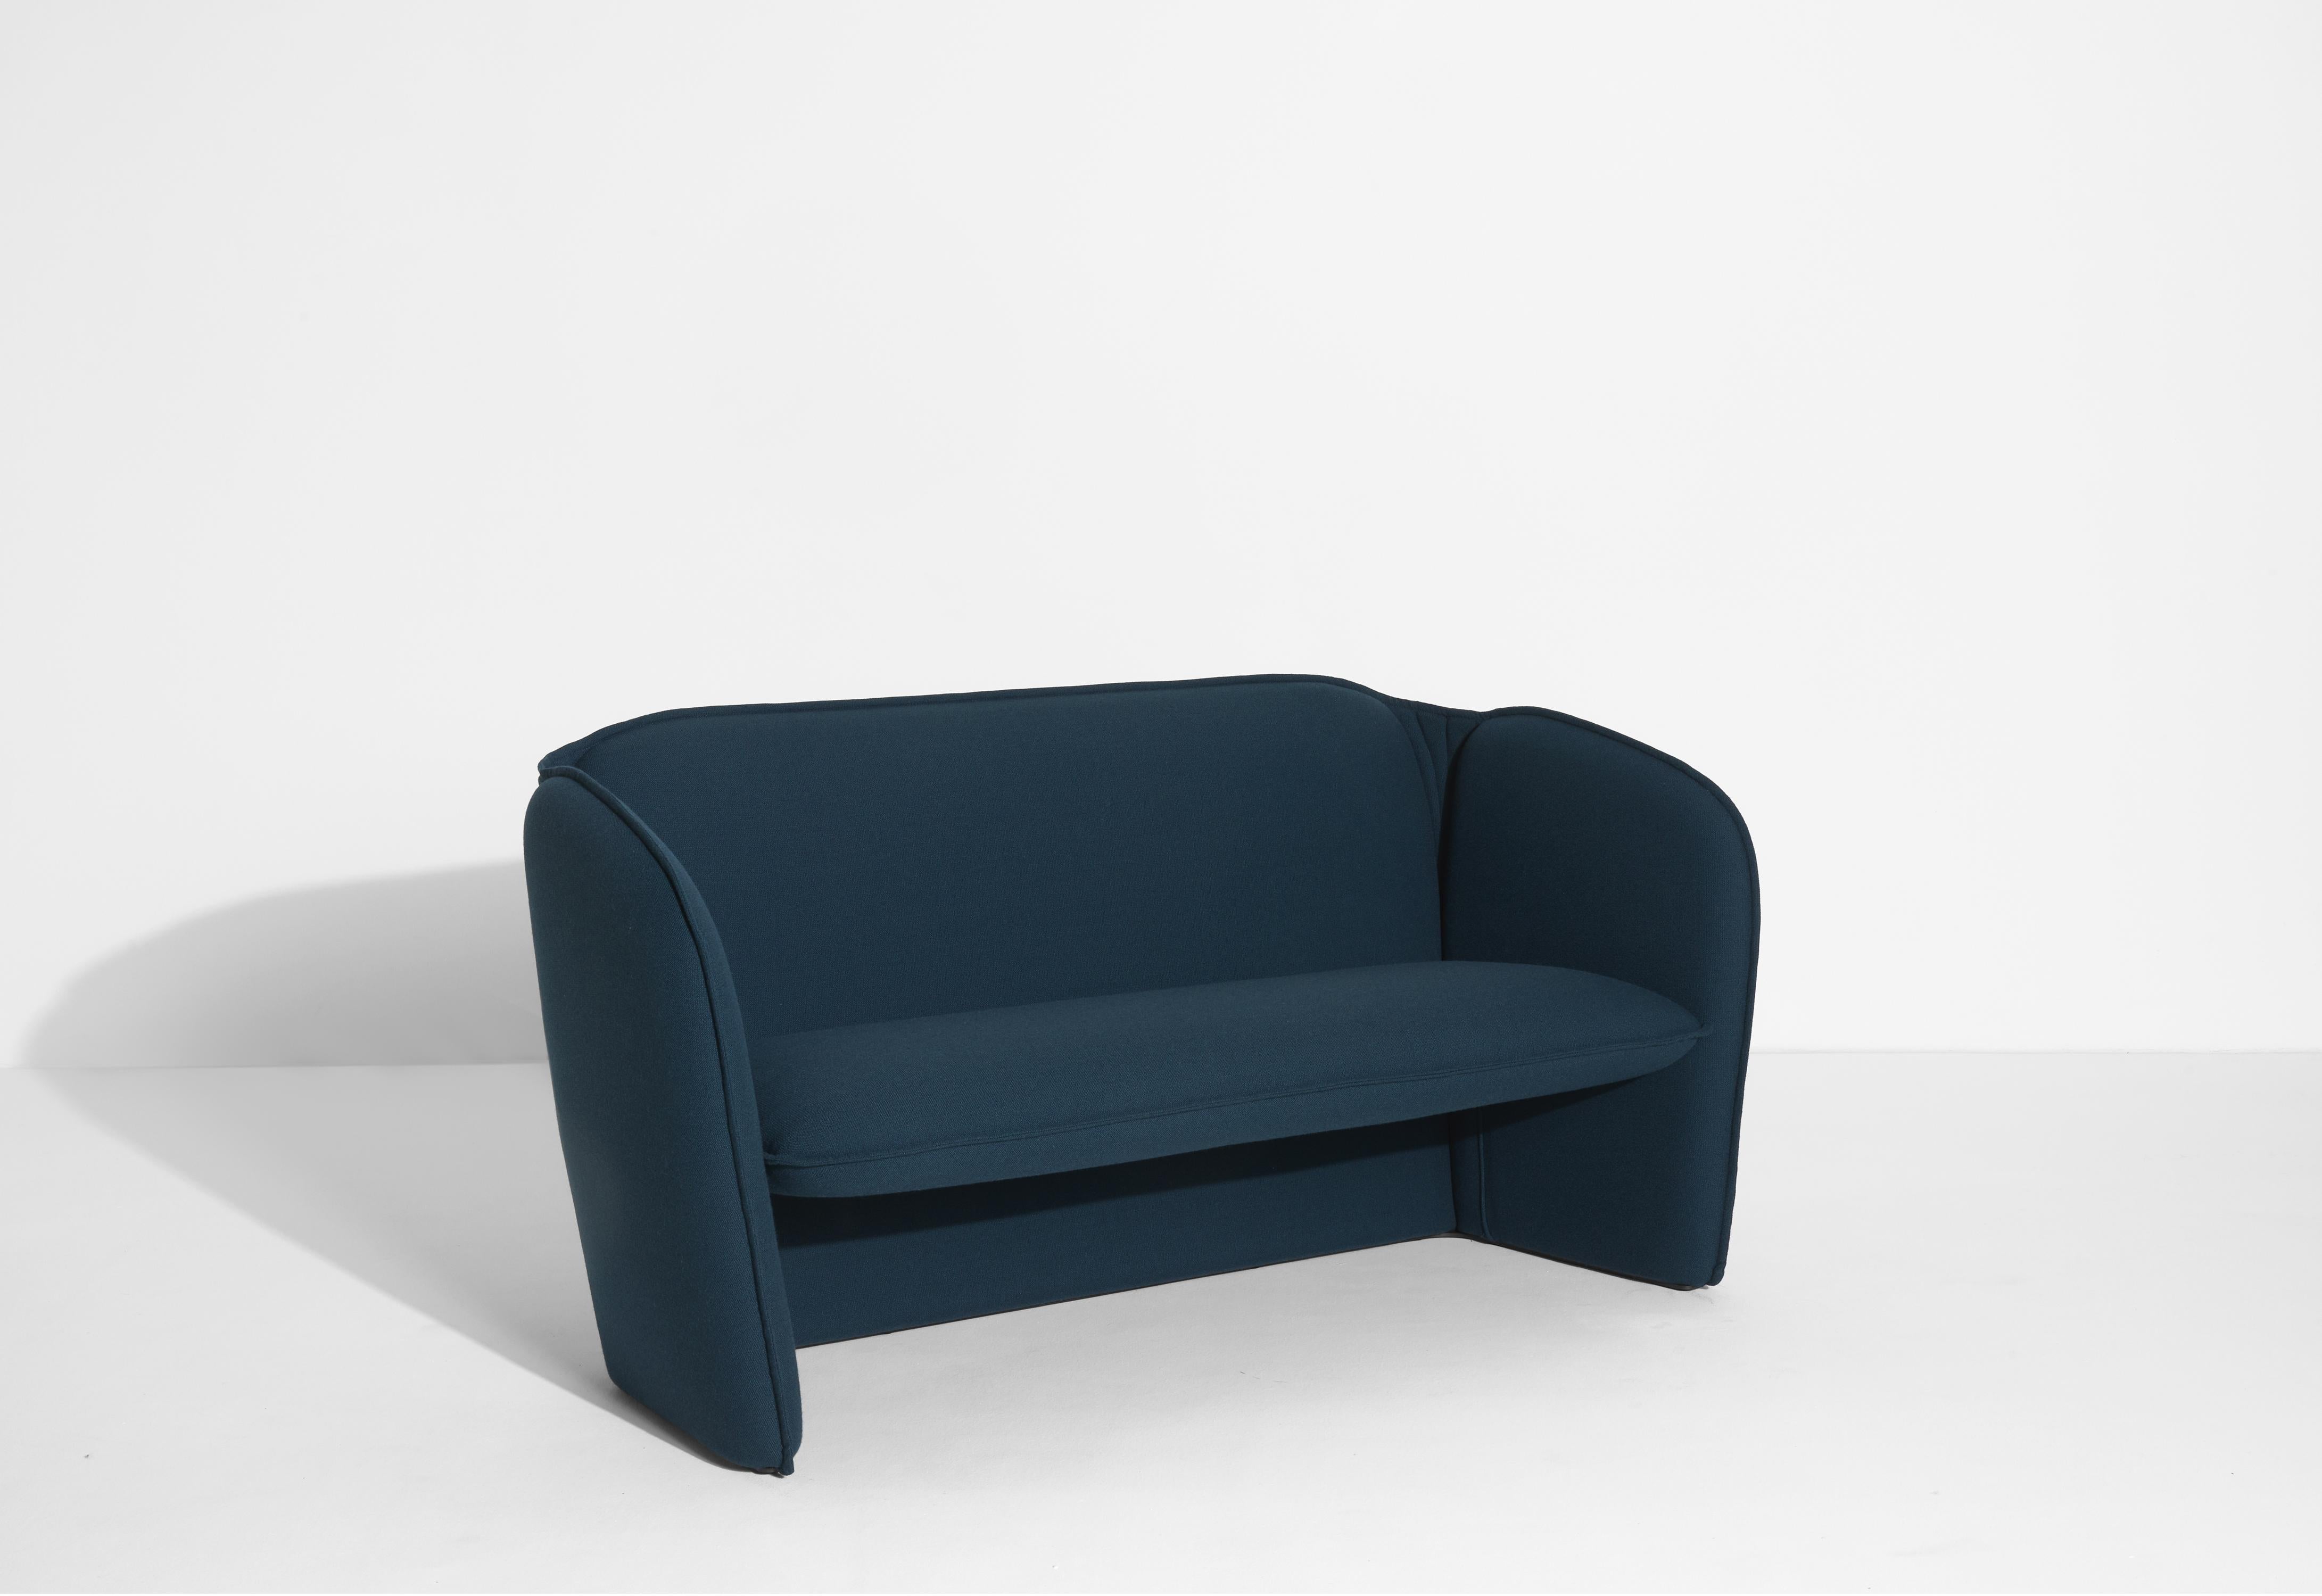 Upholstery Petite Friture Lily Sofa in Navy Blue by Färg & Blanche, 2022 For Sale